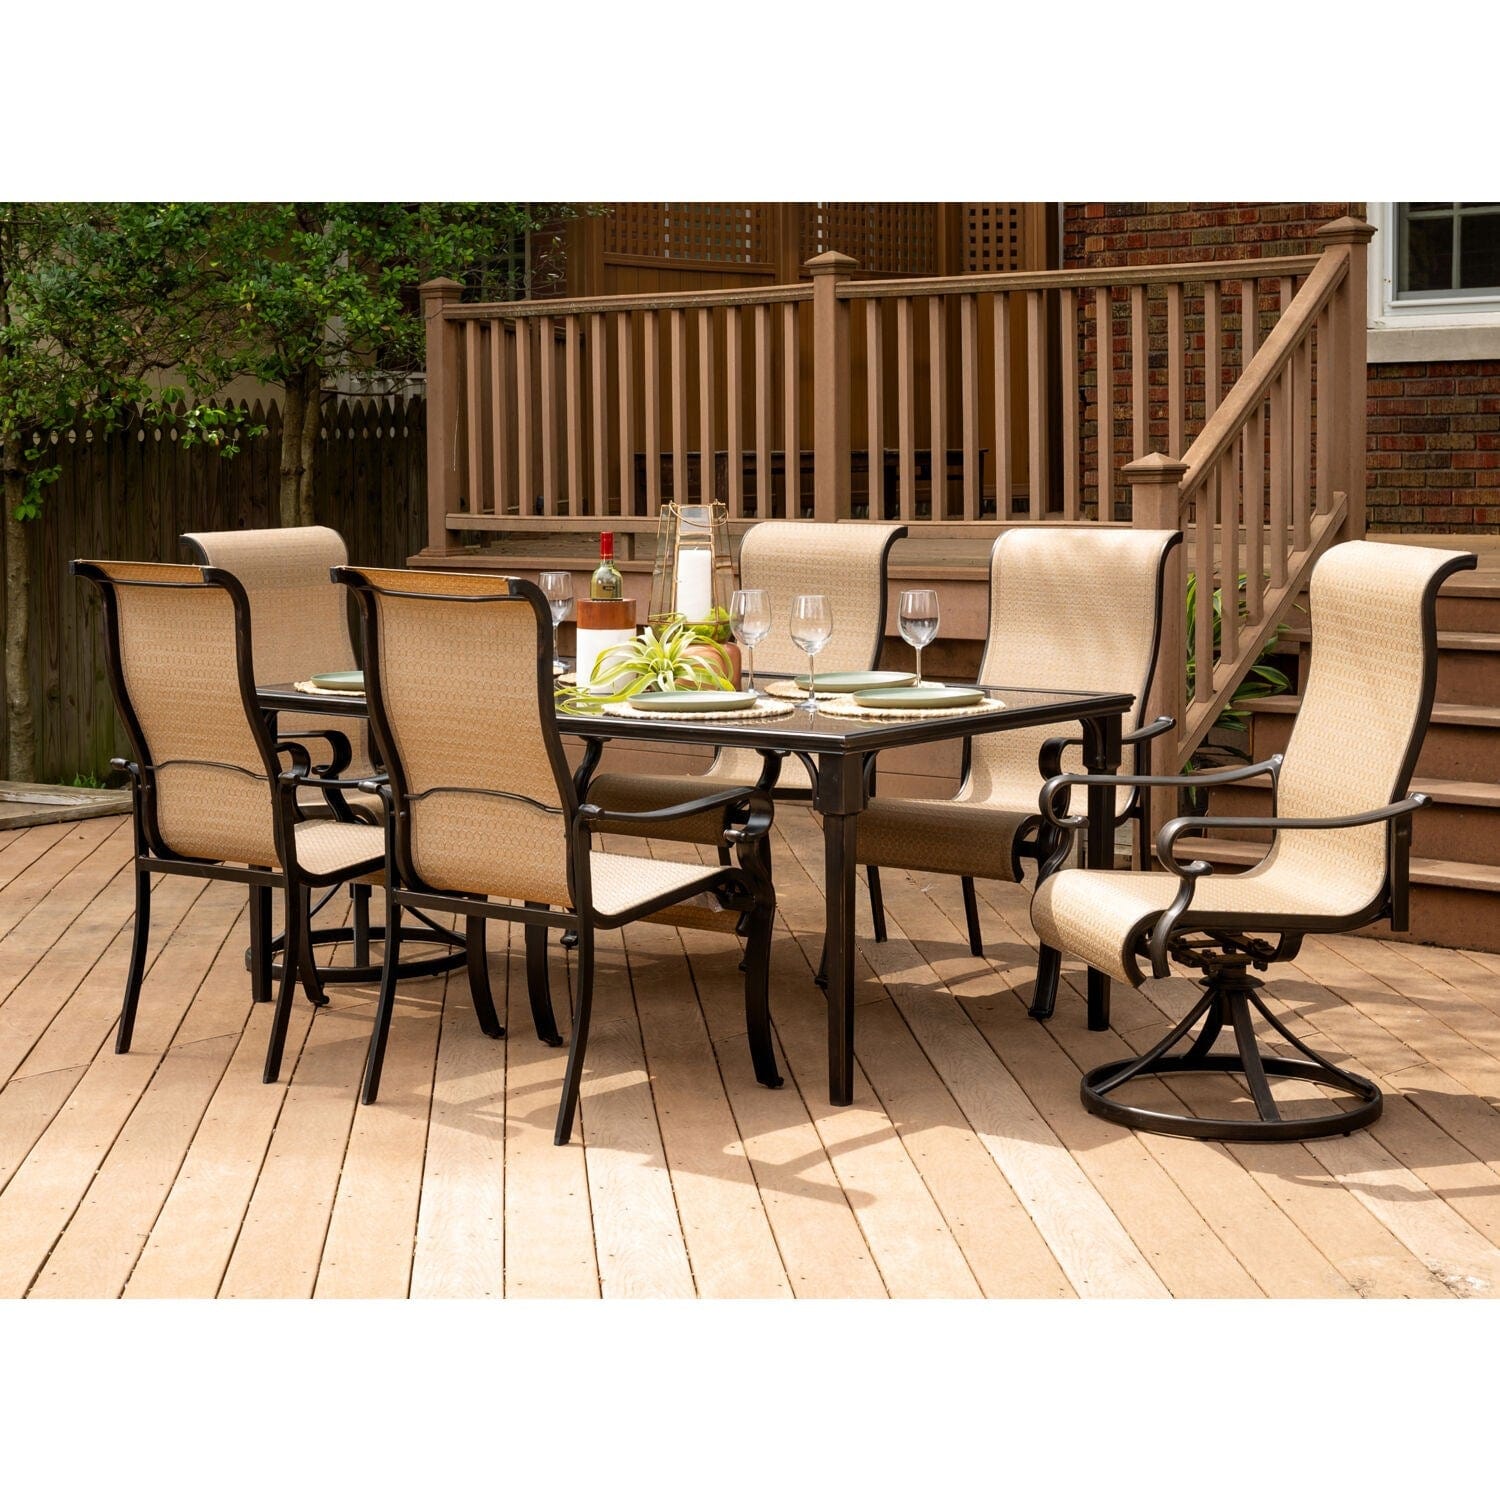 Hanover Outdoor Dining Set Hanover Brigantine 7 Piece Dining Set with a 40" x 70" Glass-Top Dining Table, 2 Sling Swivel Rockers, and 4 Sling Dining Chairs - Cast/Tan - BRIGDN7PCSWG-2